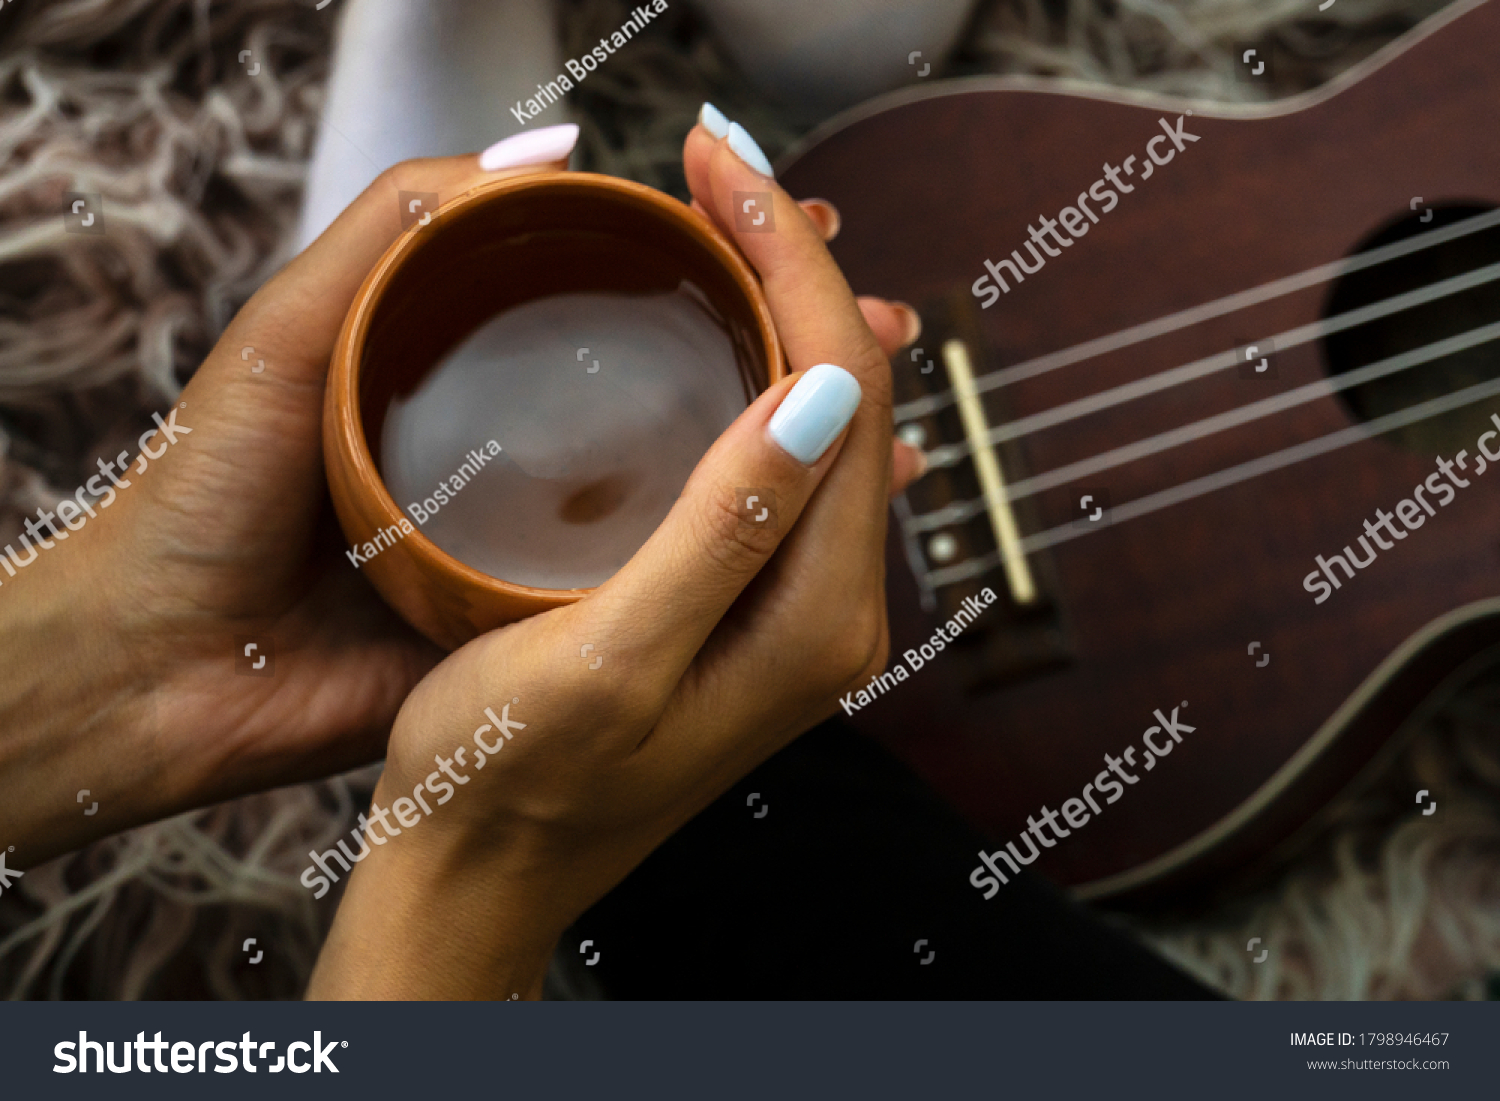 Cozy photo of woman's hands holding cup of tea with ukulele on backdrop. Fall or winter time concept. Wellbeing and simple pleasures concept #1798946467